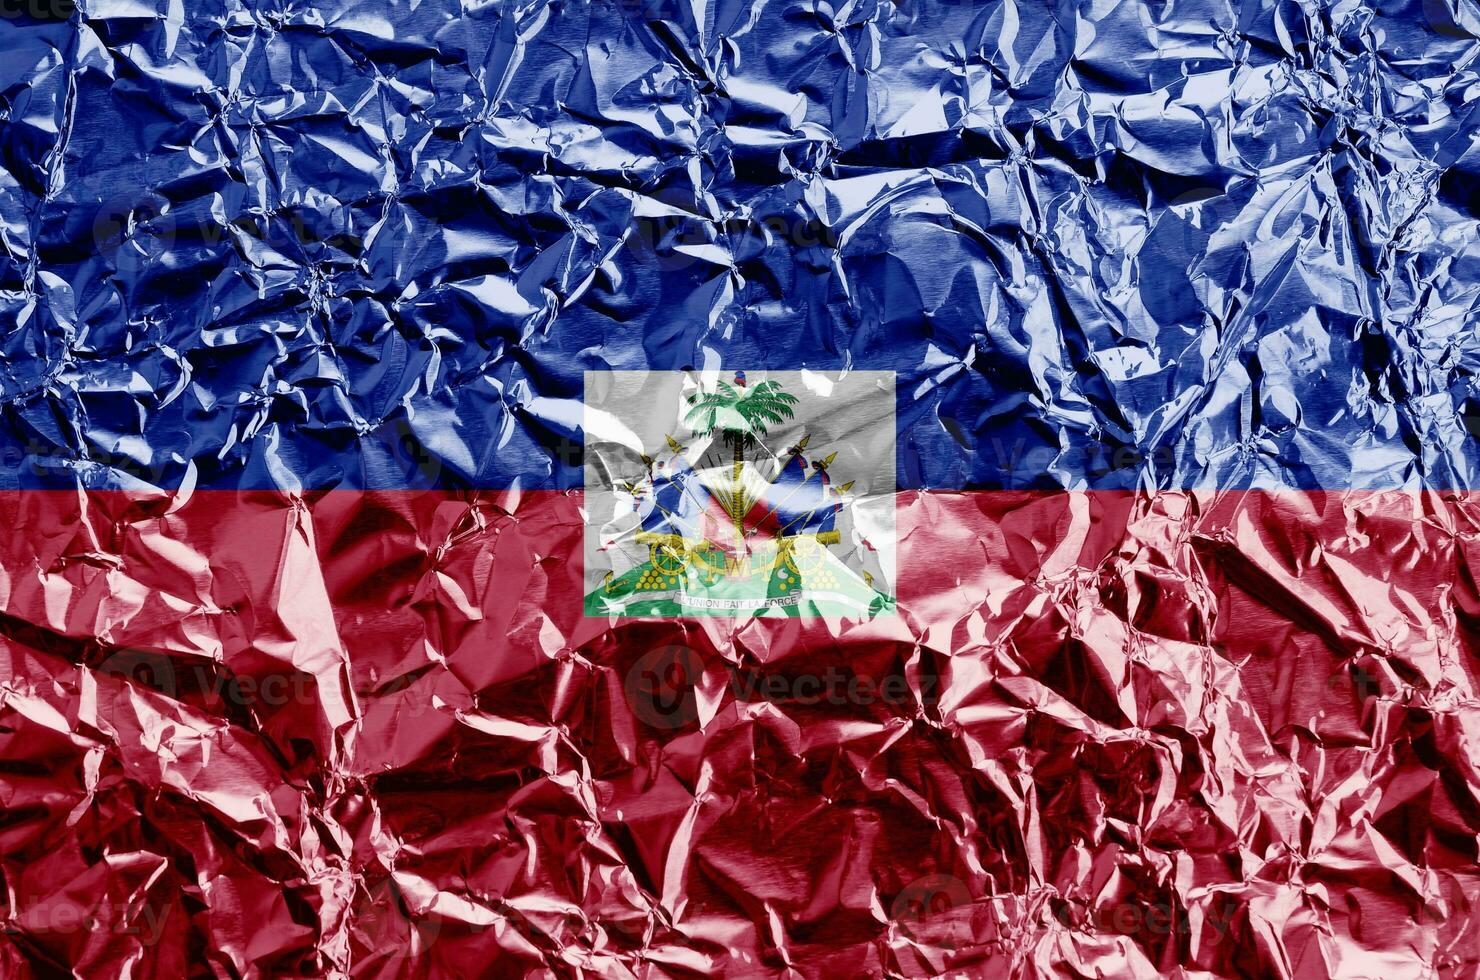 Haiti flag depicted in paint colors on shiny crumpled aluminium foil closeup. Textured banner on rough background photo